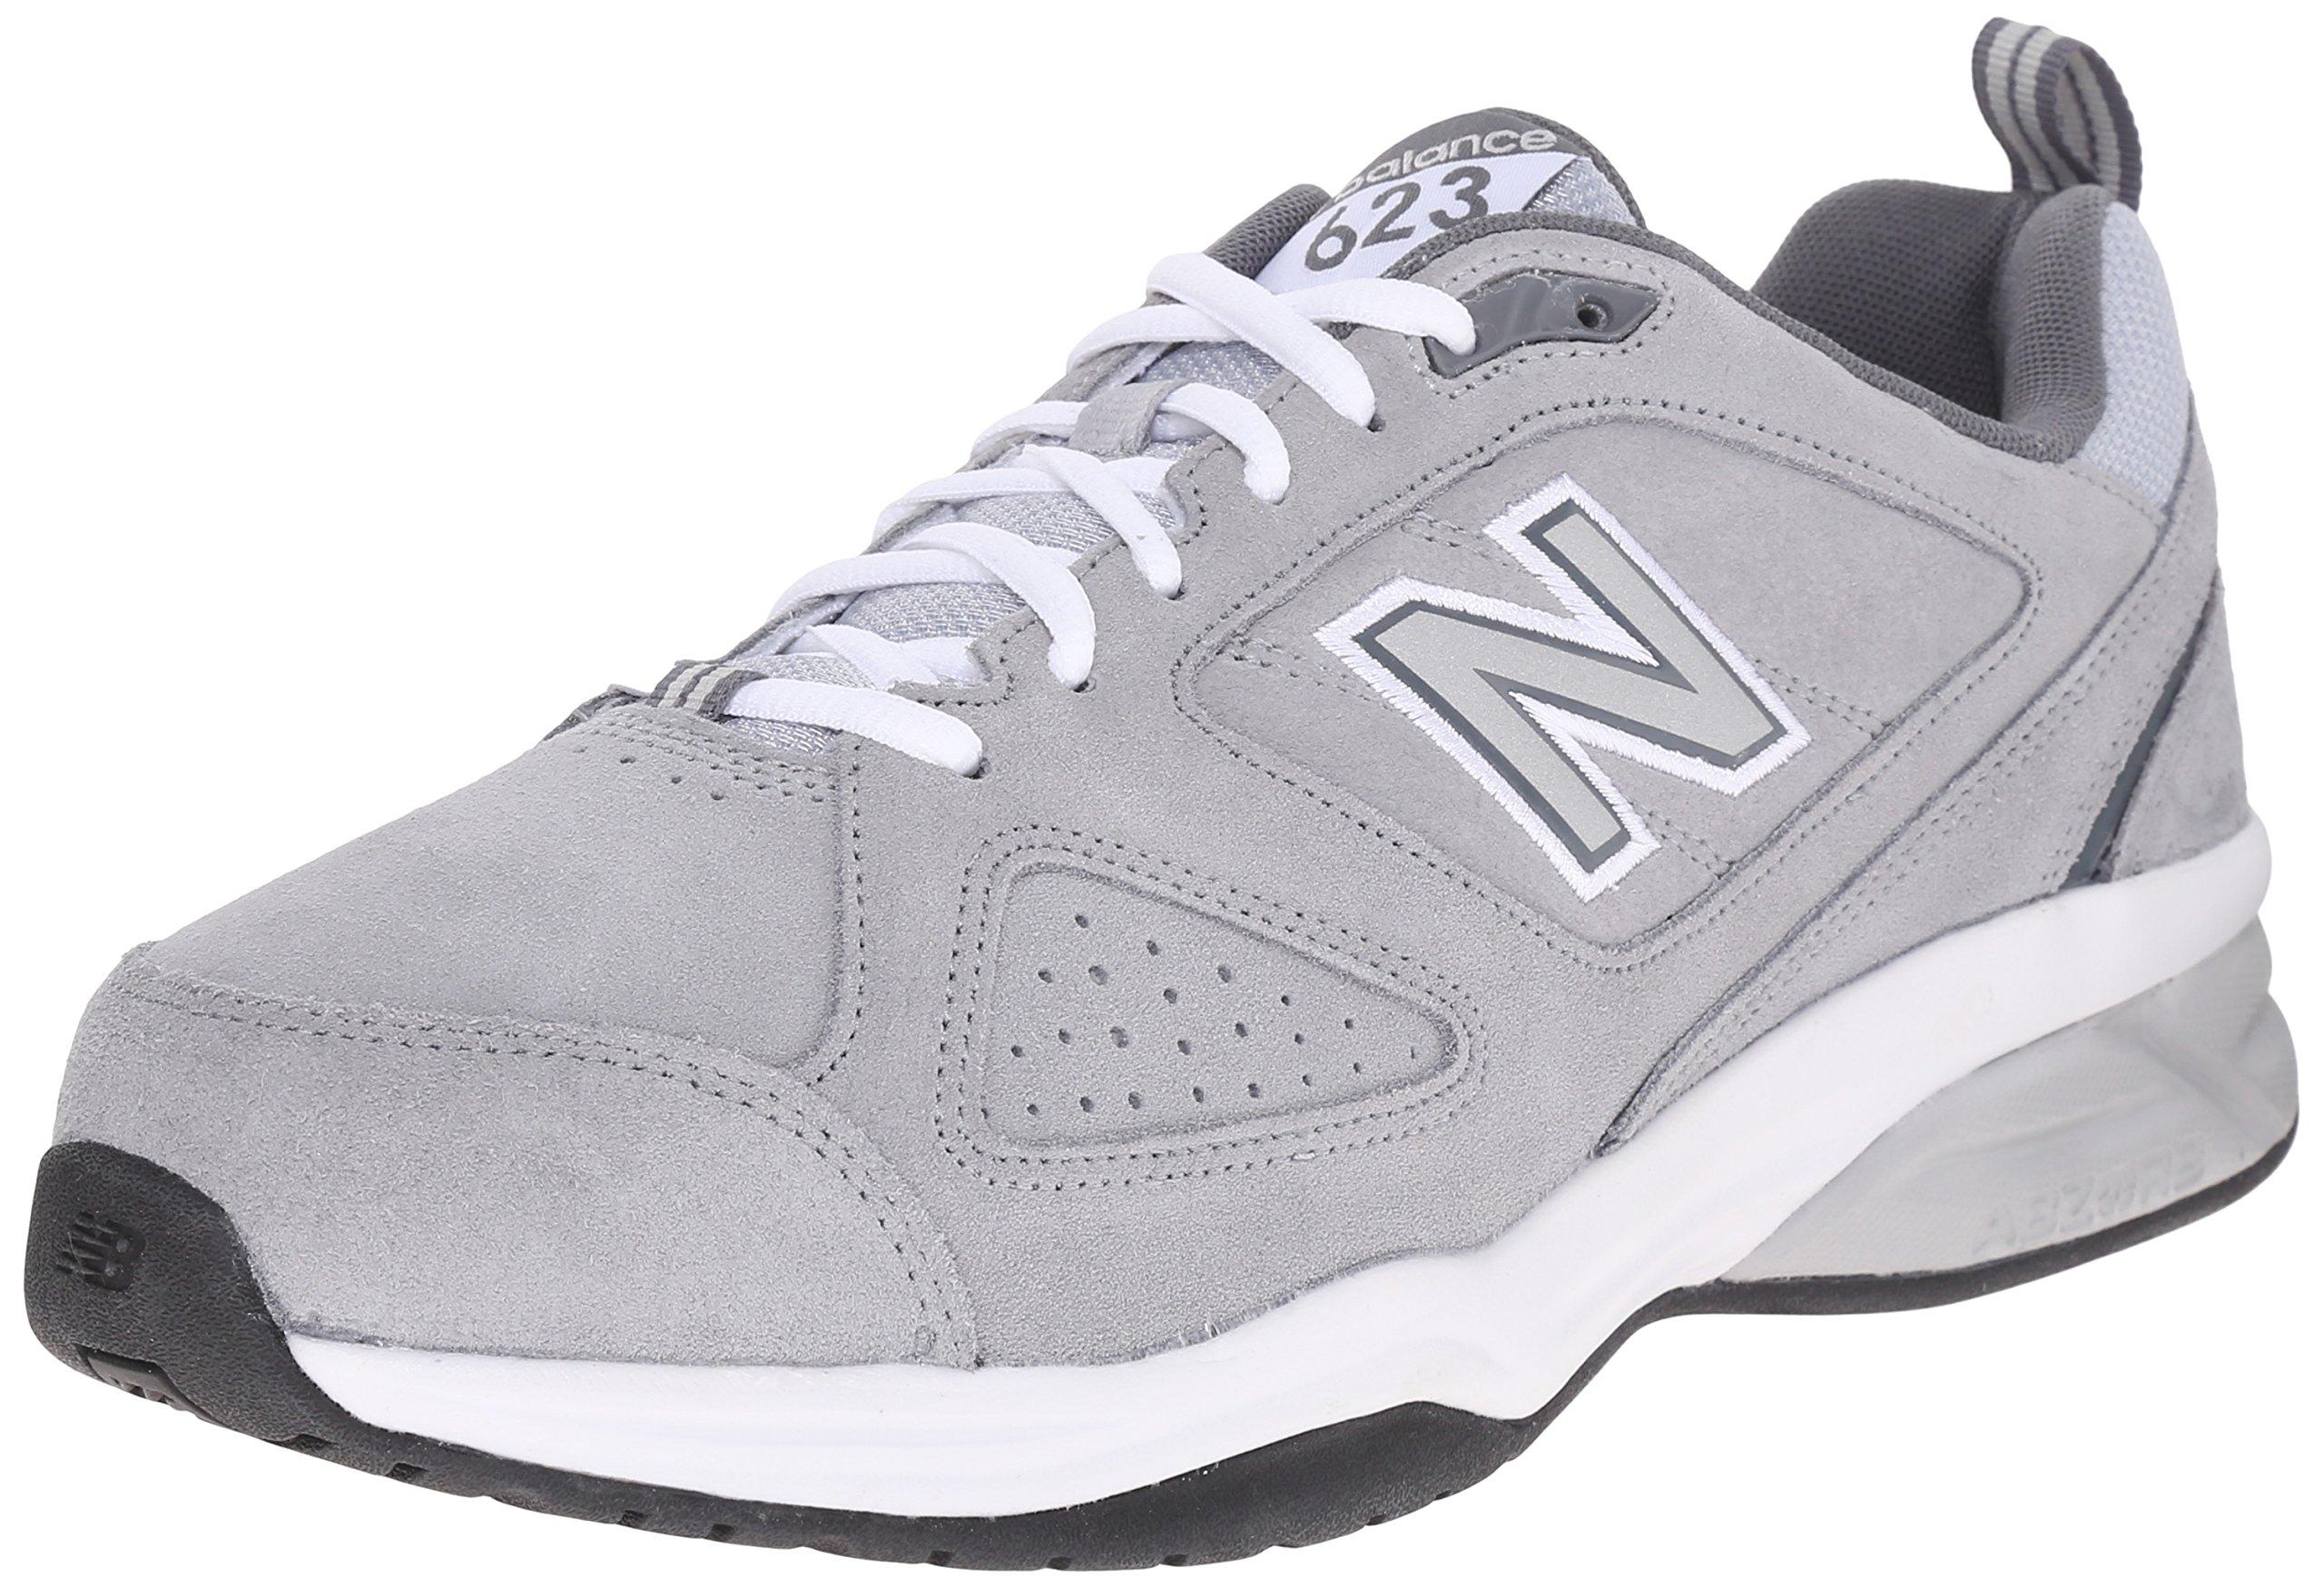 New Balance Leather 623 V3 Casual Comfort Cross Trainer in Grey (Gray ...